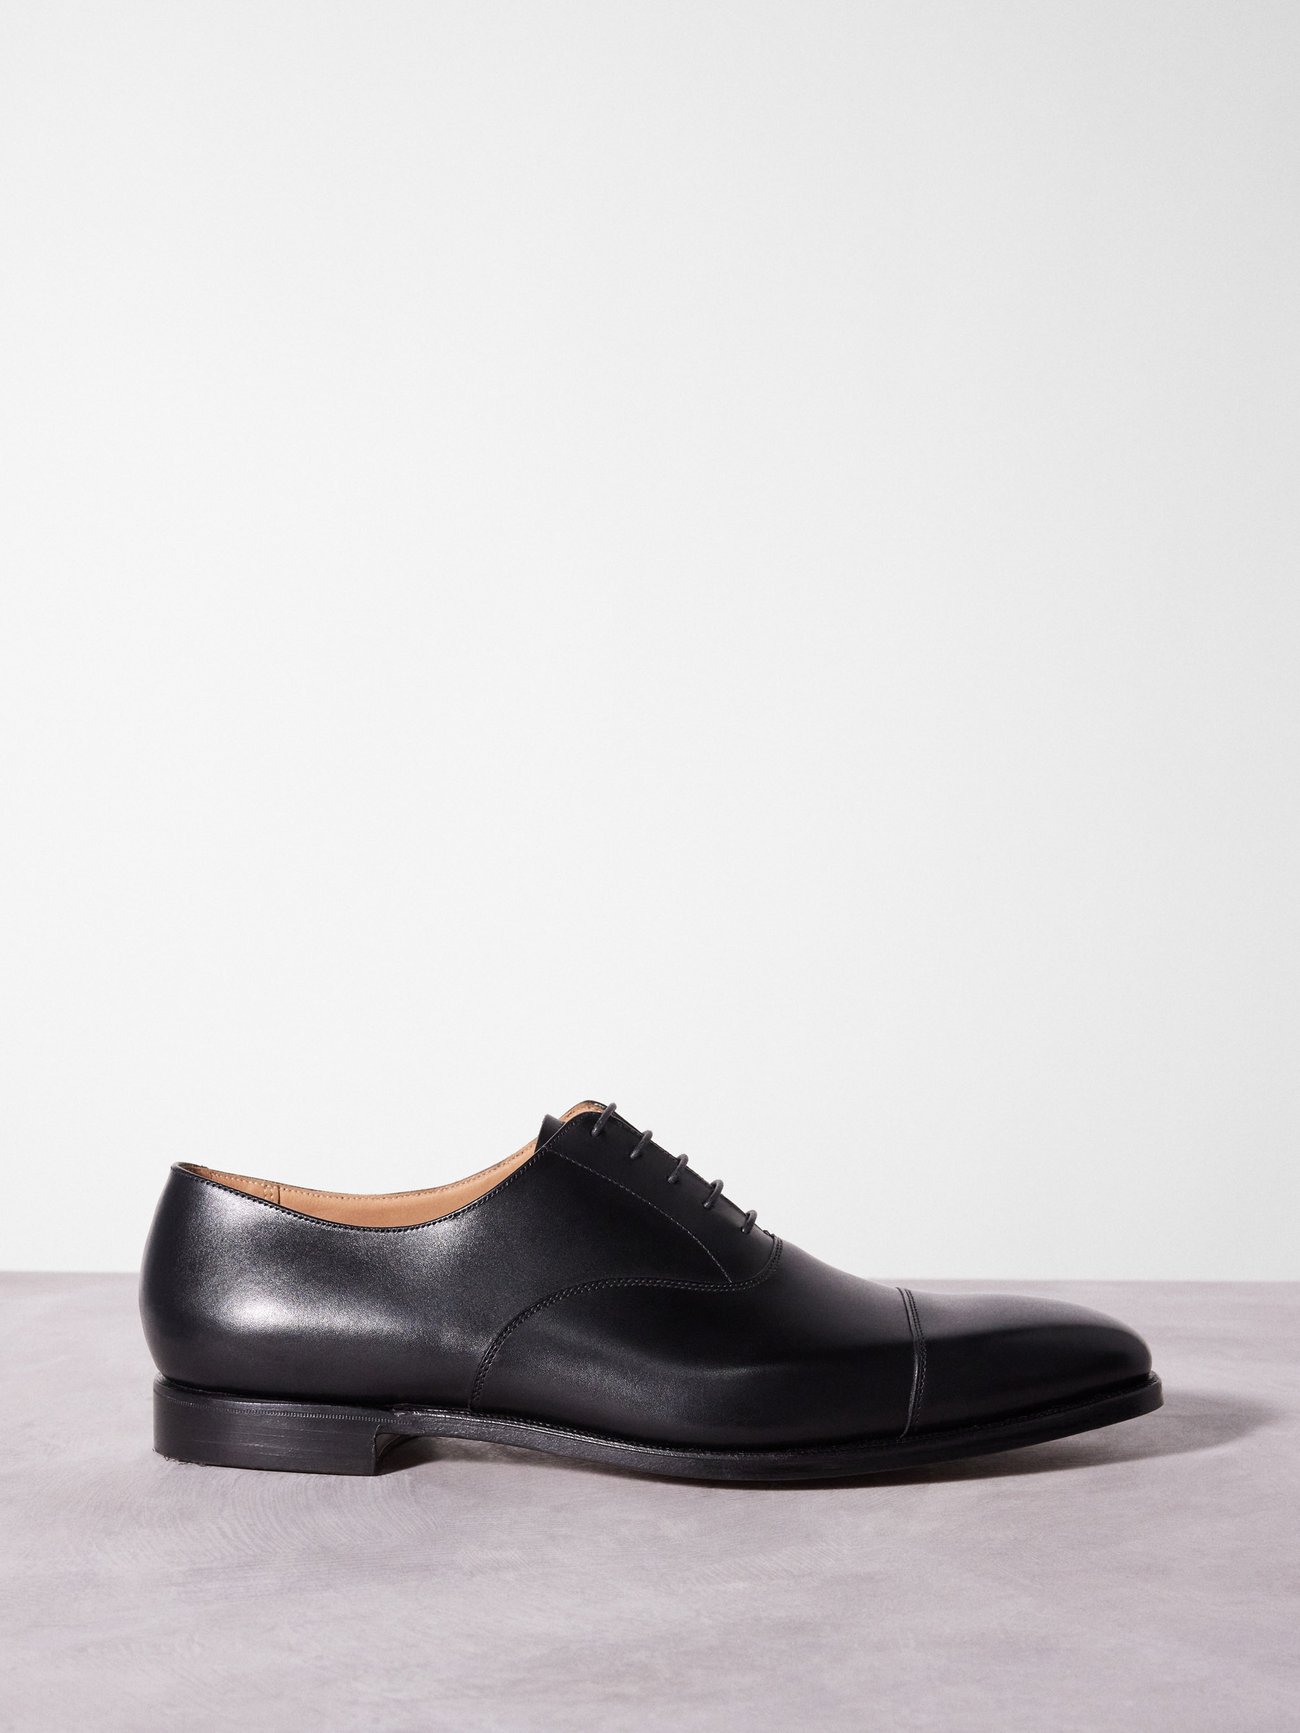 Hallam leather Oxford shoes video